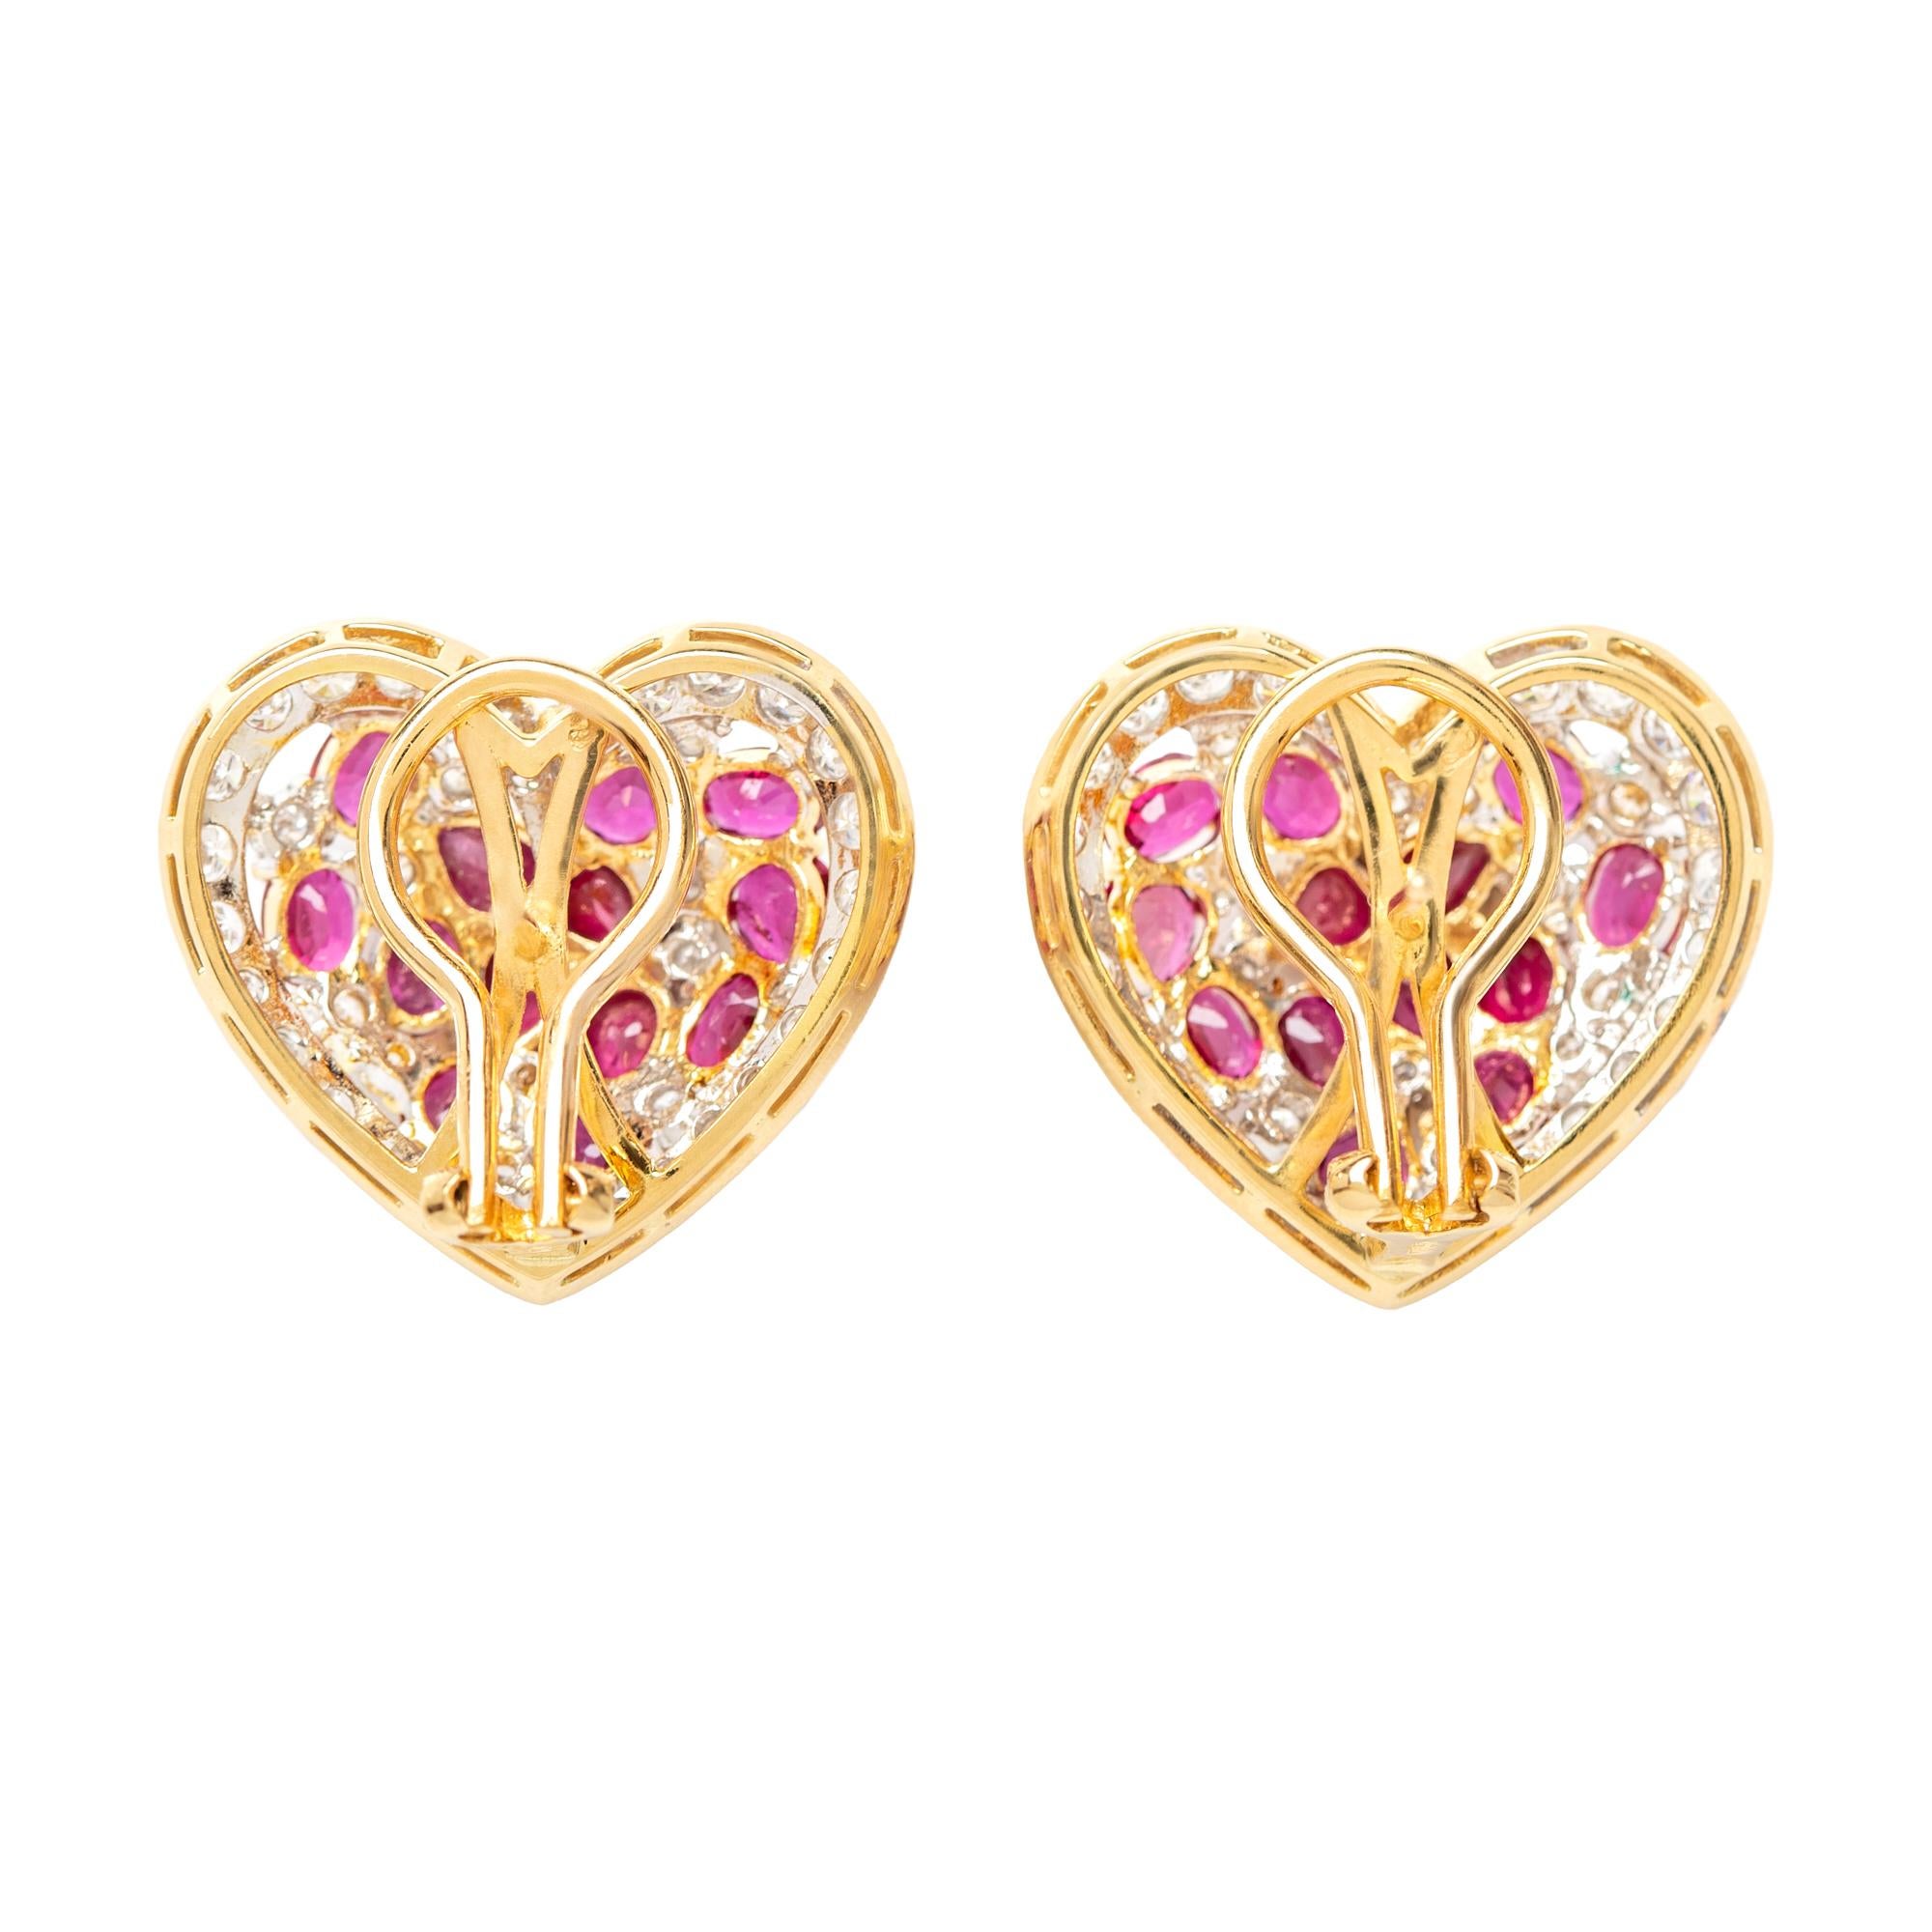 Heart-shaped ear clips are set with oval and pear-shaped ruby clusters accented by round brilliant-cut diamond surrounds. 

26 pear and oval cut rubies weighing a total of approximately 7.30 carats
82 full-cut diamonds weighing a total of